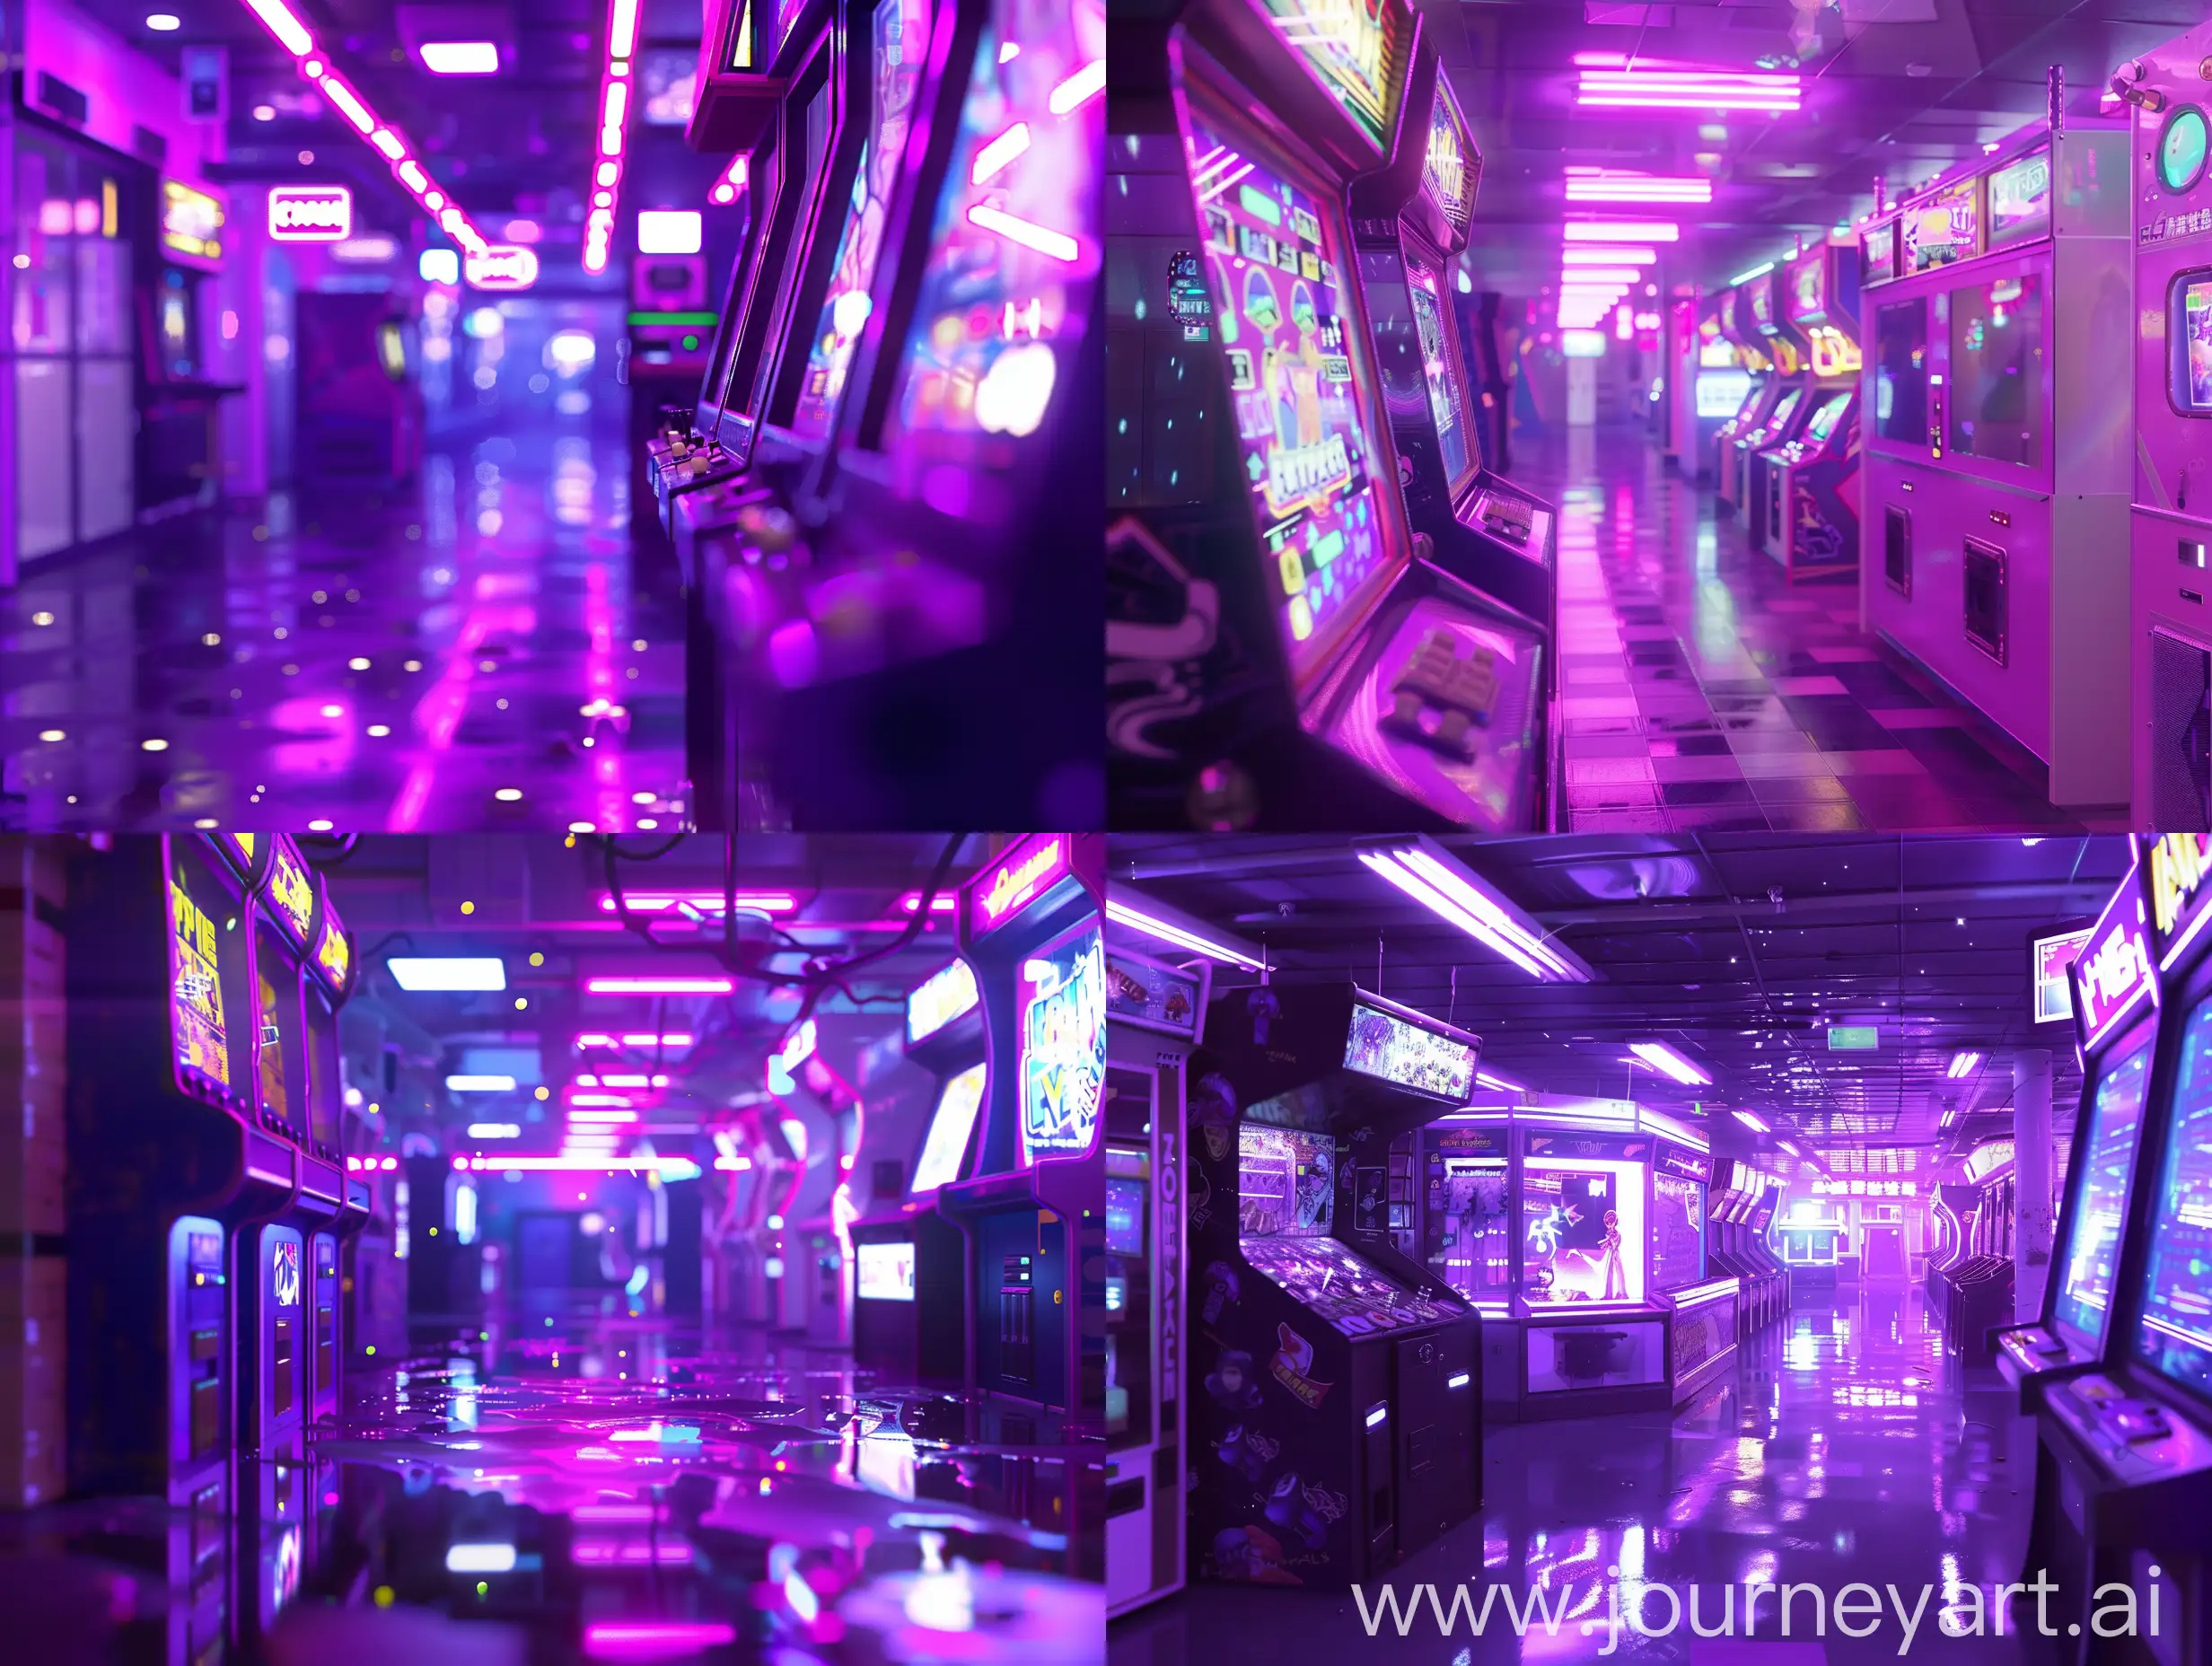 purple background it's just the background of it, neon, 4K, high quality, artistic, high definition, anime style, futuristic, cyperpunk, indoors arcade setting, bokeh, glowy